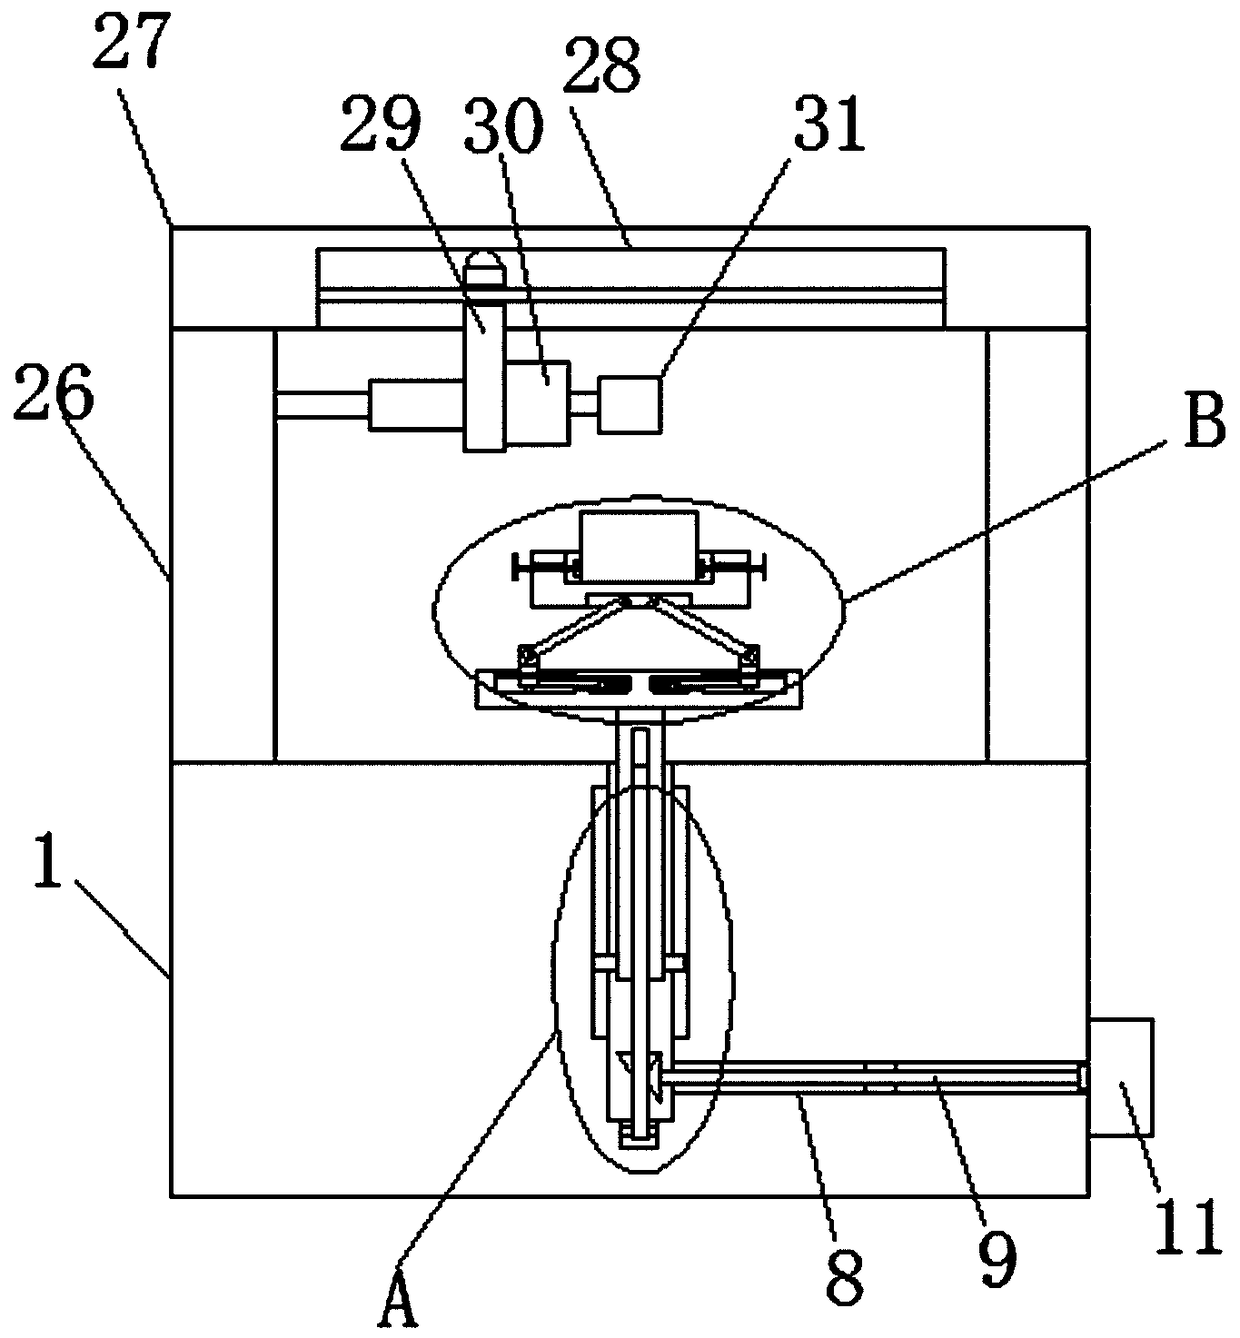 Carbon brush grinding equipment and utilization method thereof